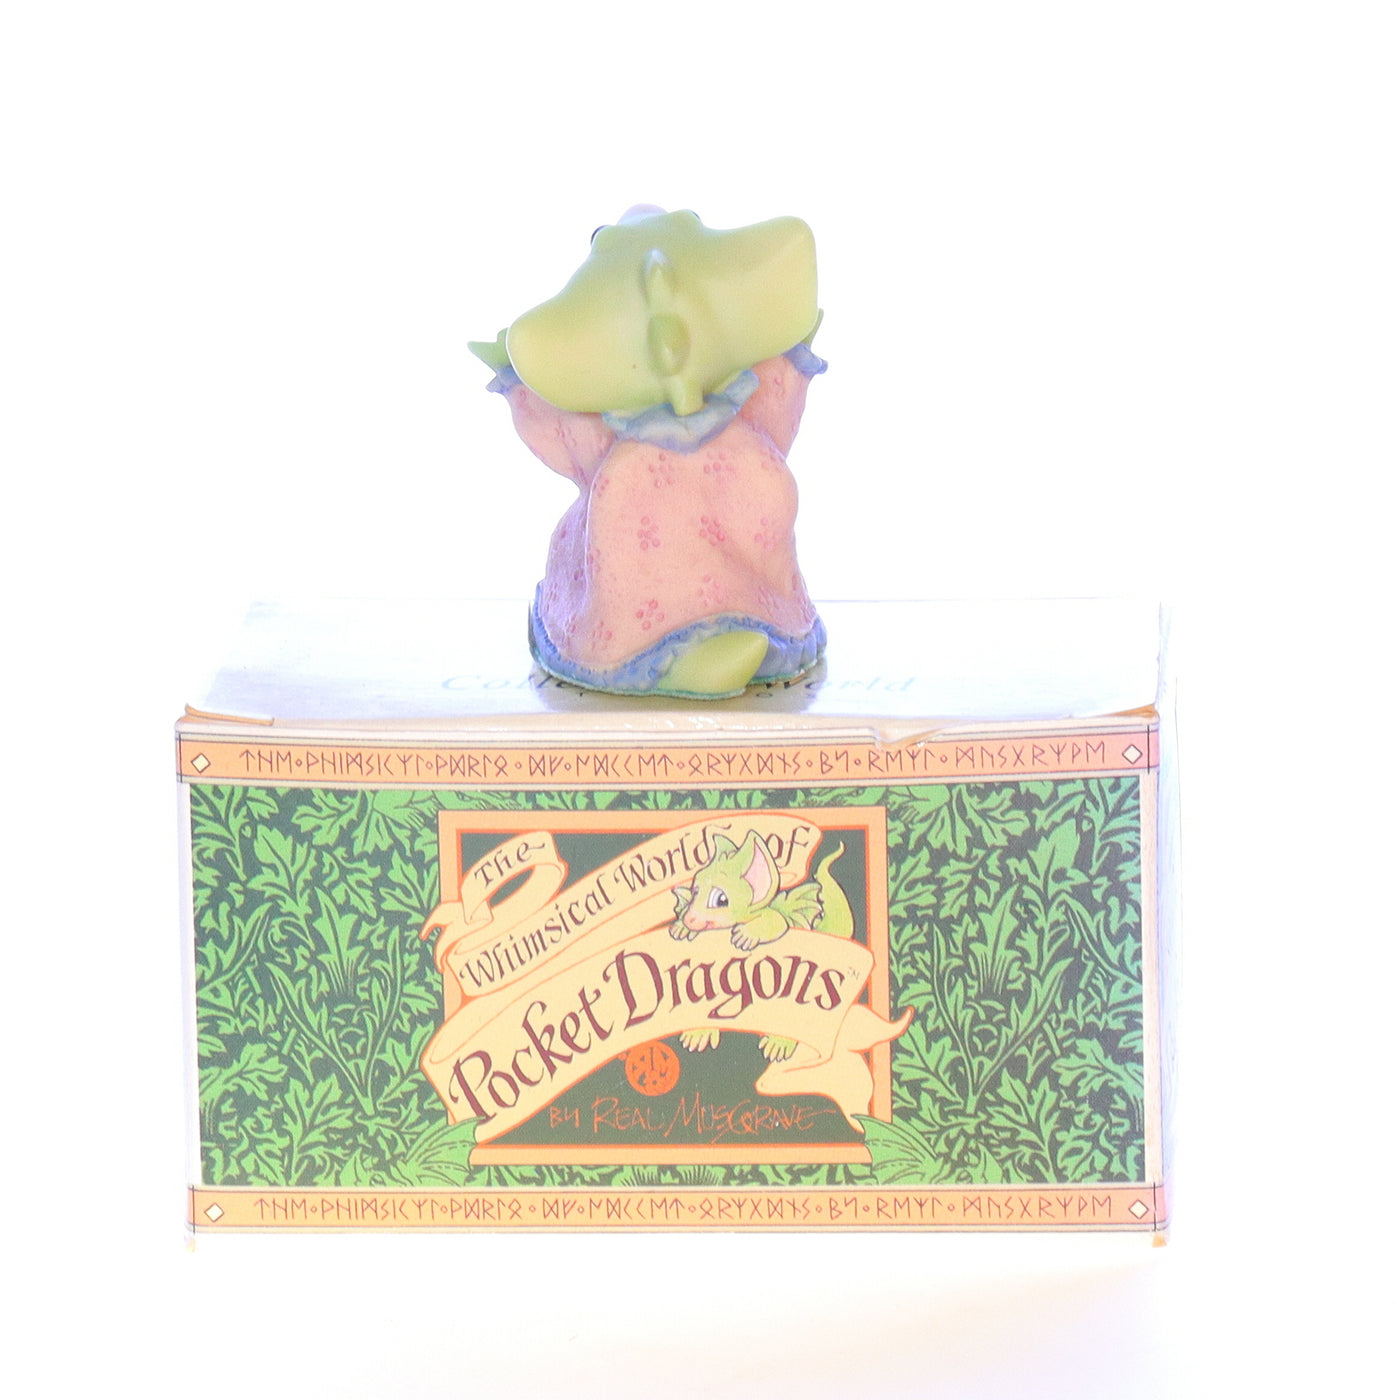 Whimsical_World_of_Pocket_Dragons_053839028998_Flannel_Nightie_Fantasy_Figurine_1998_Box Back View